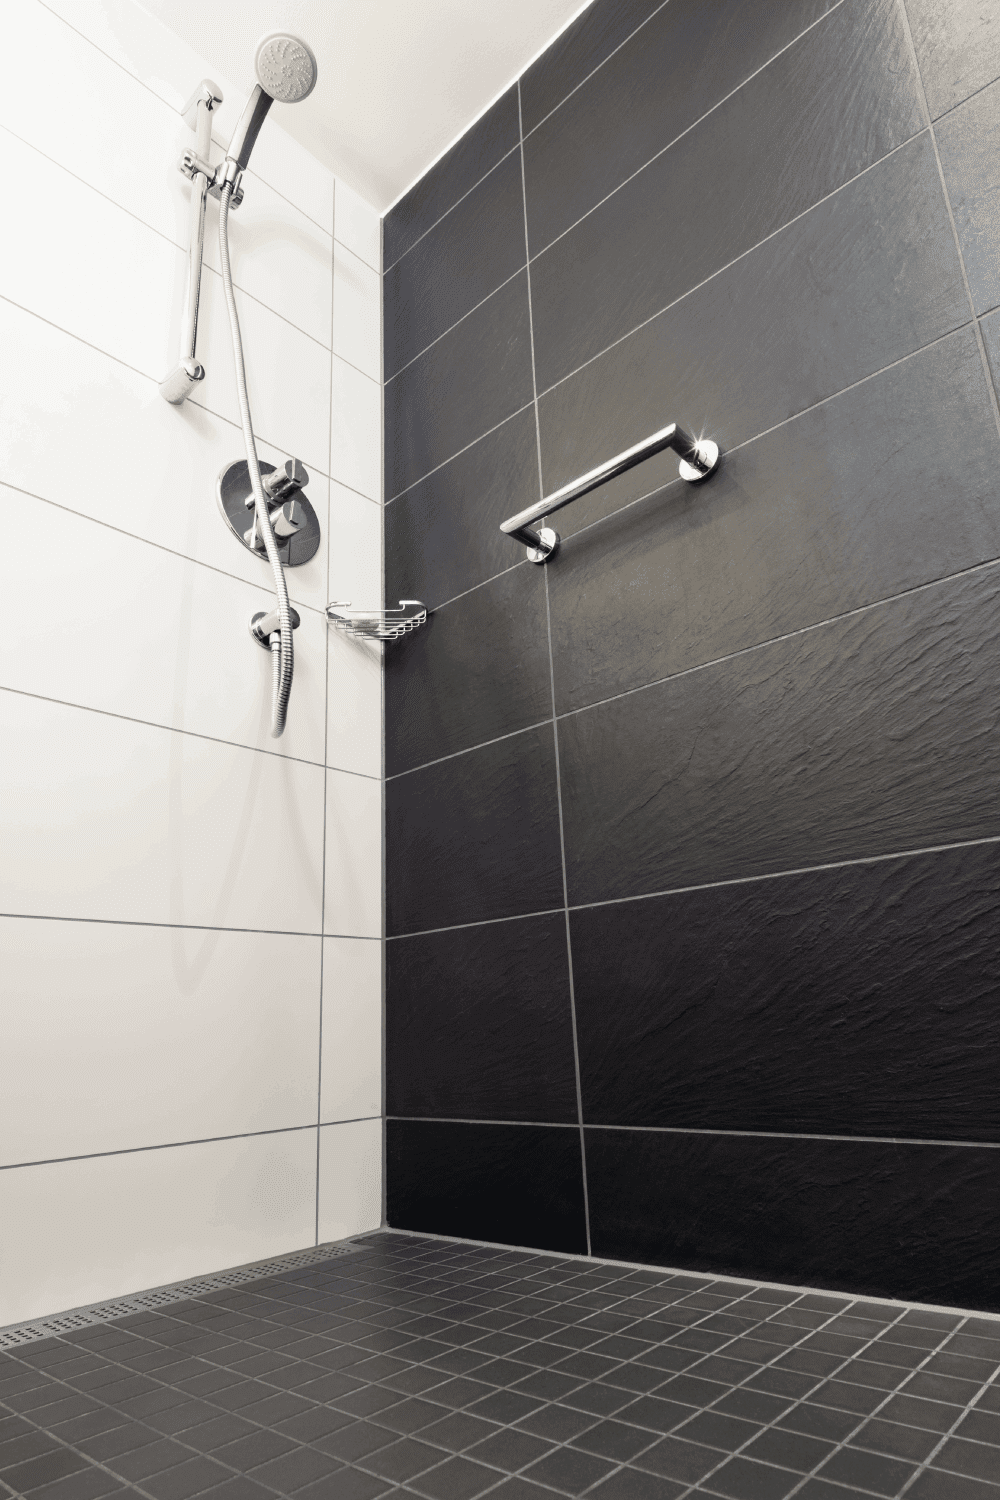 Low angle view of a modern shower enclosure, with chrome fixtures. matte finish floor tile